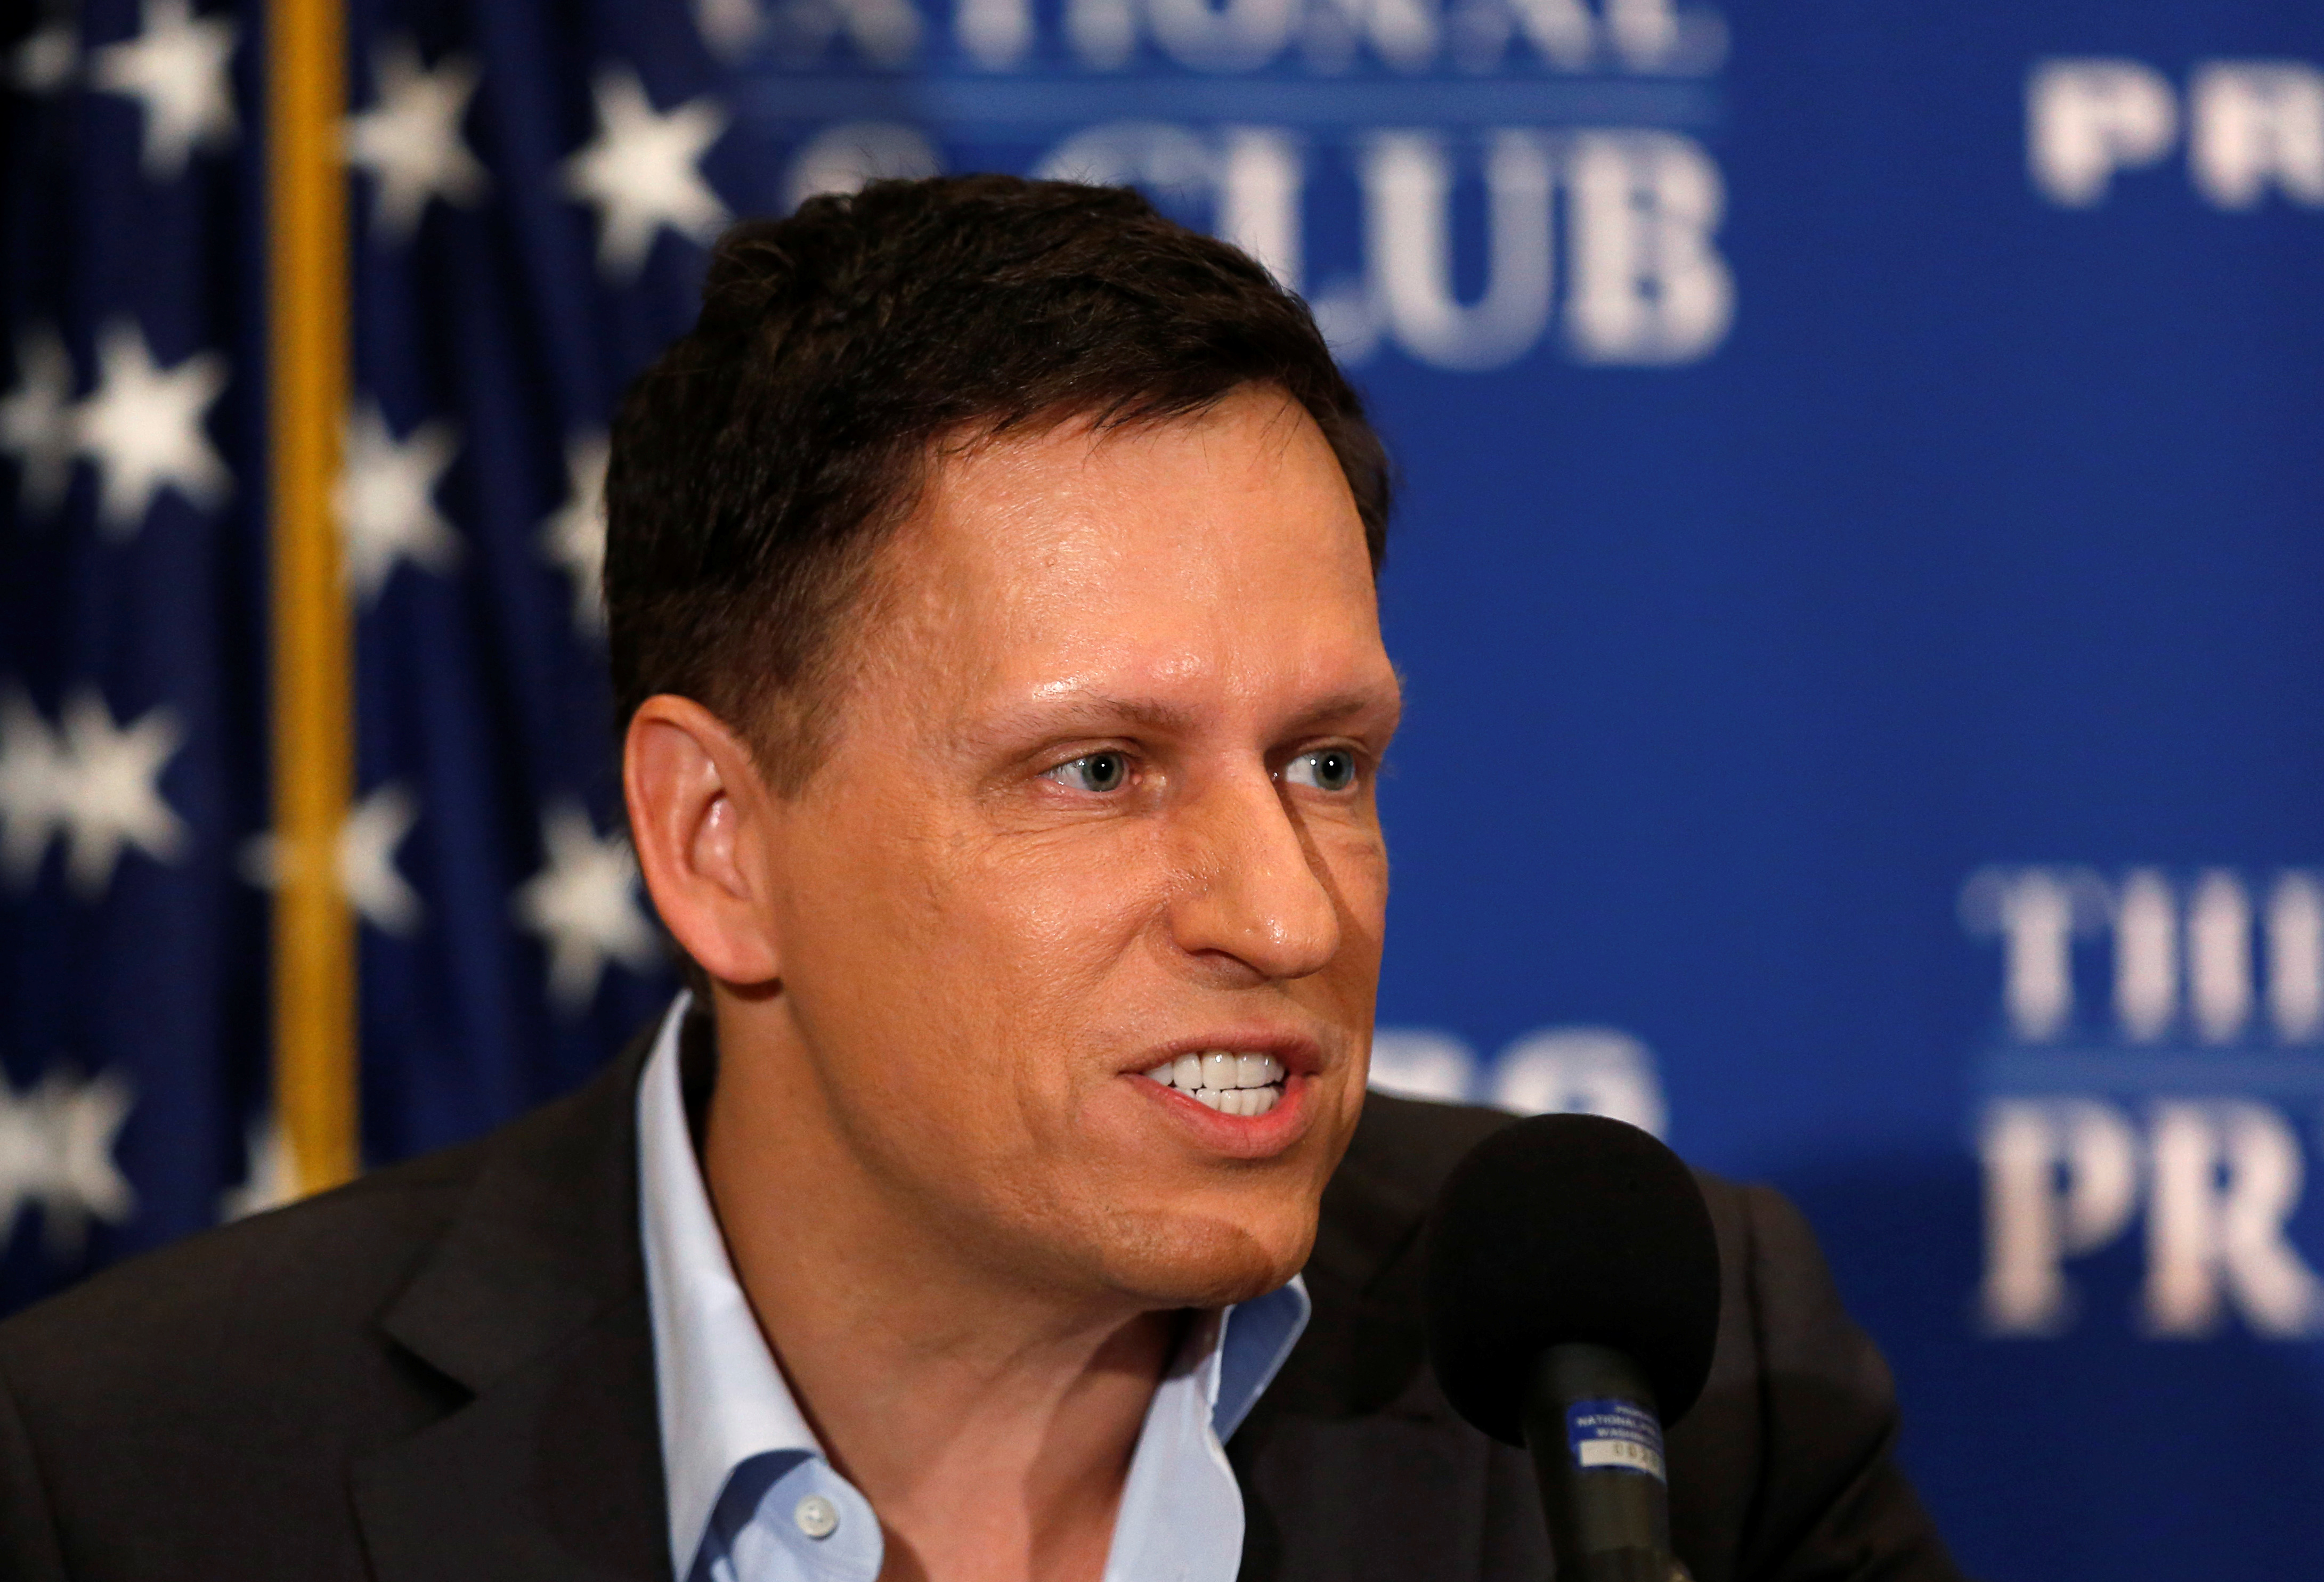 PayPal co-founder and Facebook board member Thiel delivers speech on US presidential election at the National Press Club in Washington